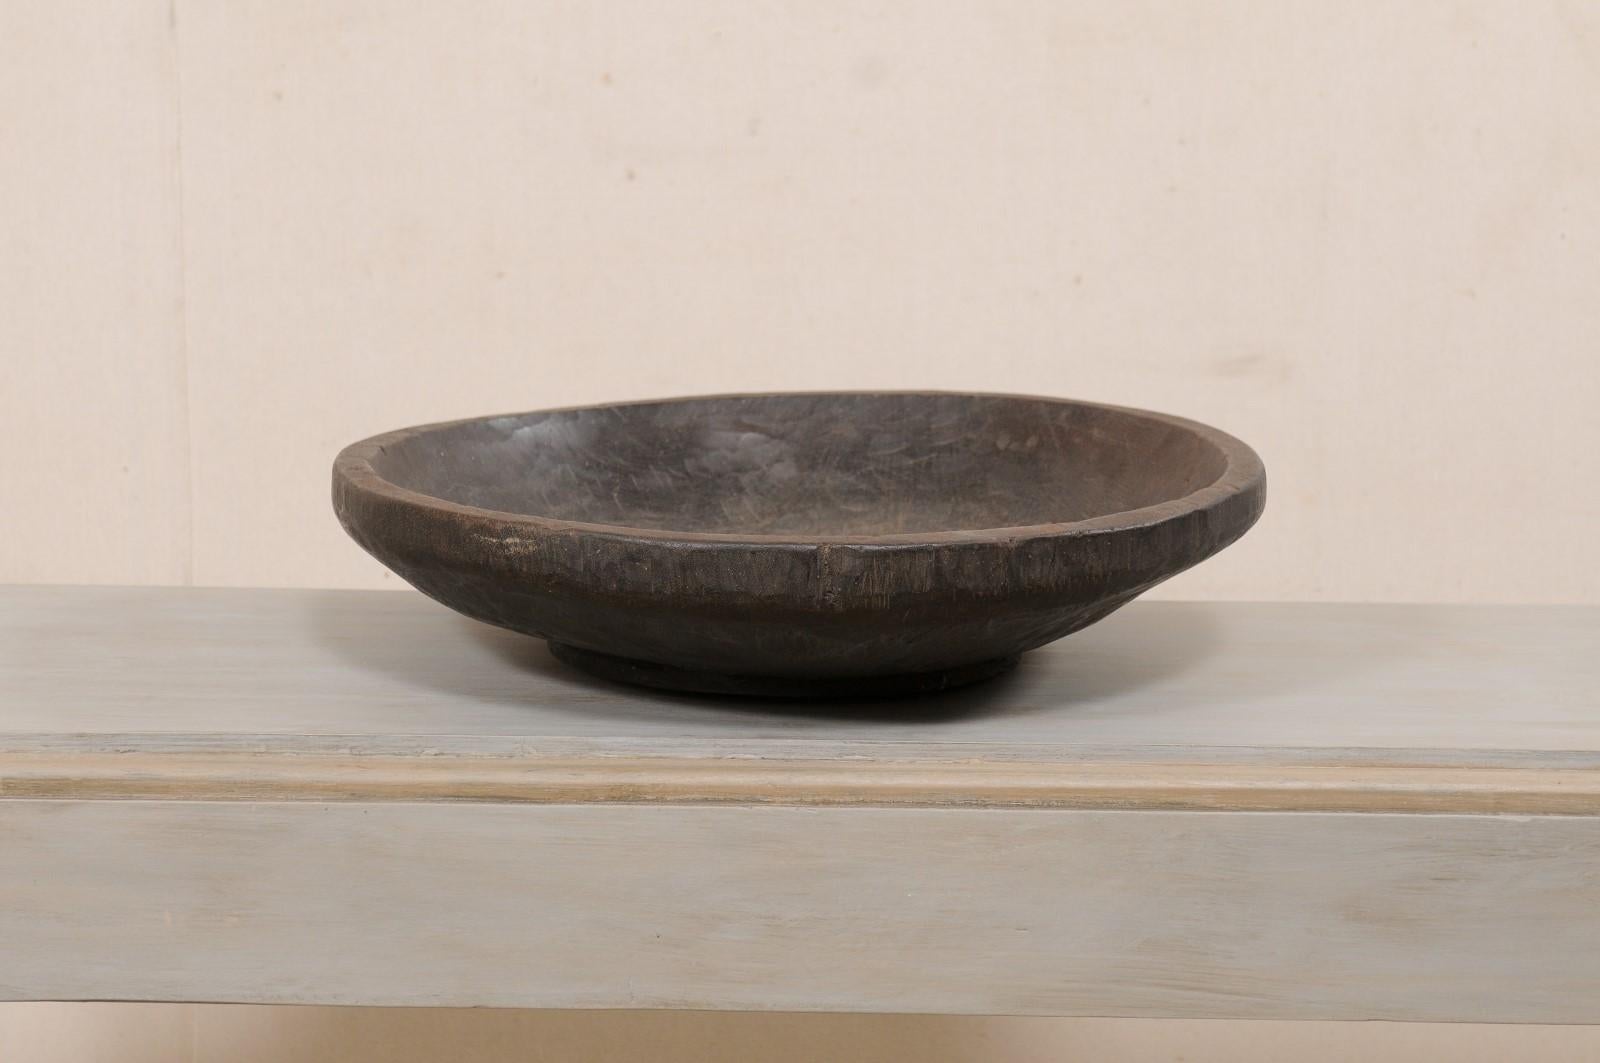 A Sumatran hand-carved wood bowl from the early 20th century. This antique wood bowl comes from the Lampung province of Sumatra, which is locate on the southern most tip of the island. This beautiful wood bowl has been hand carved from a single